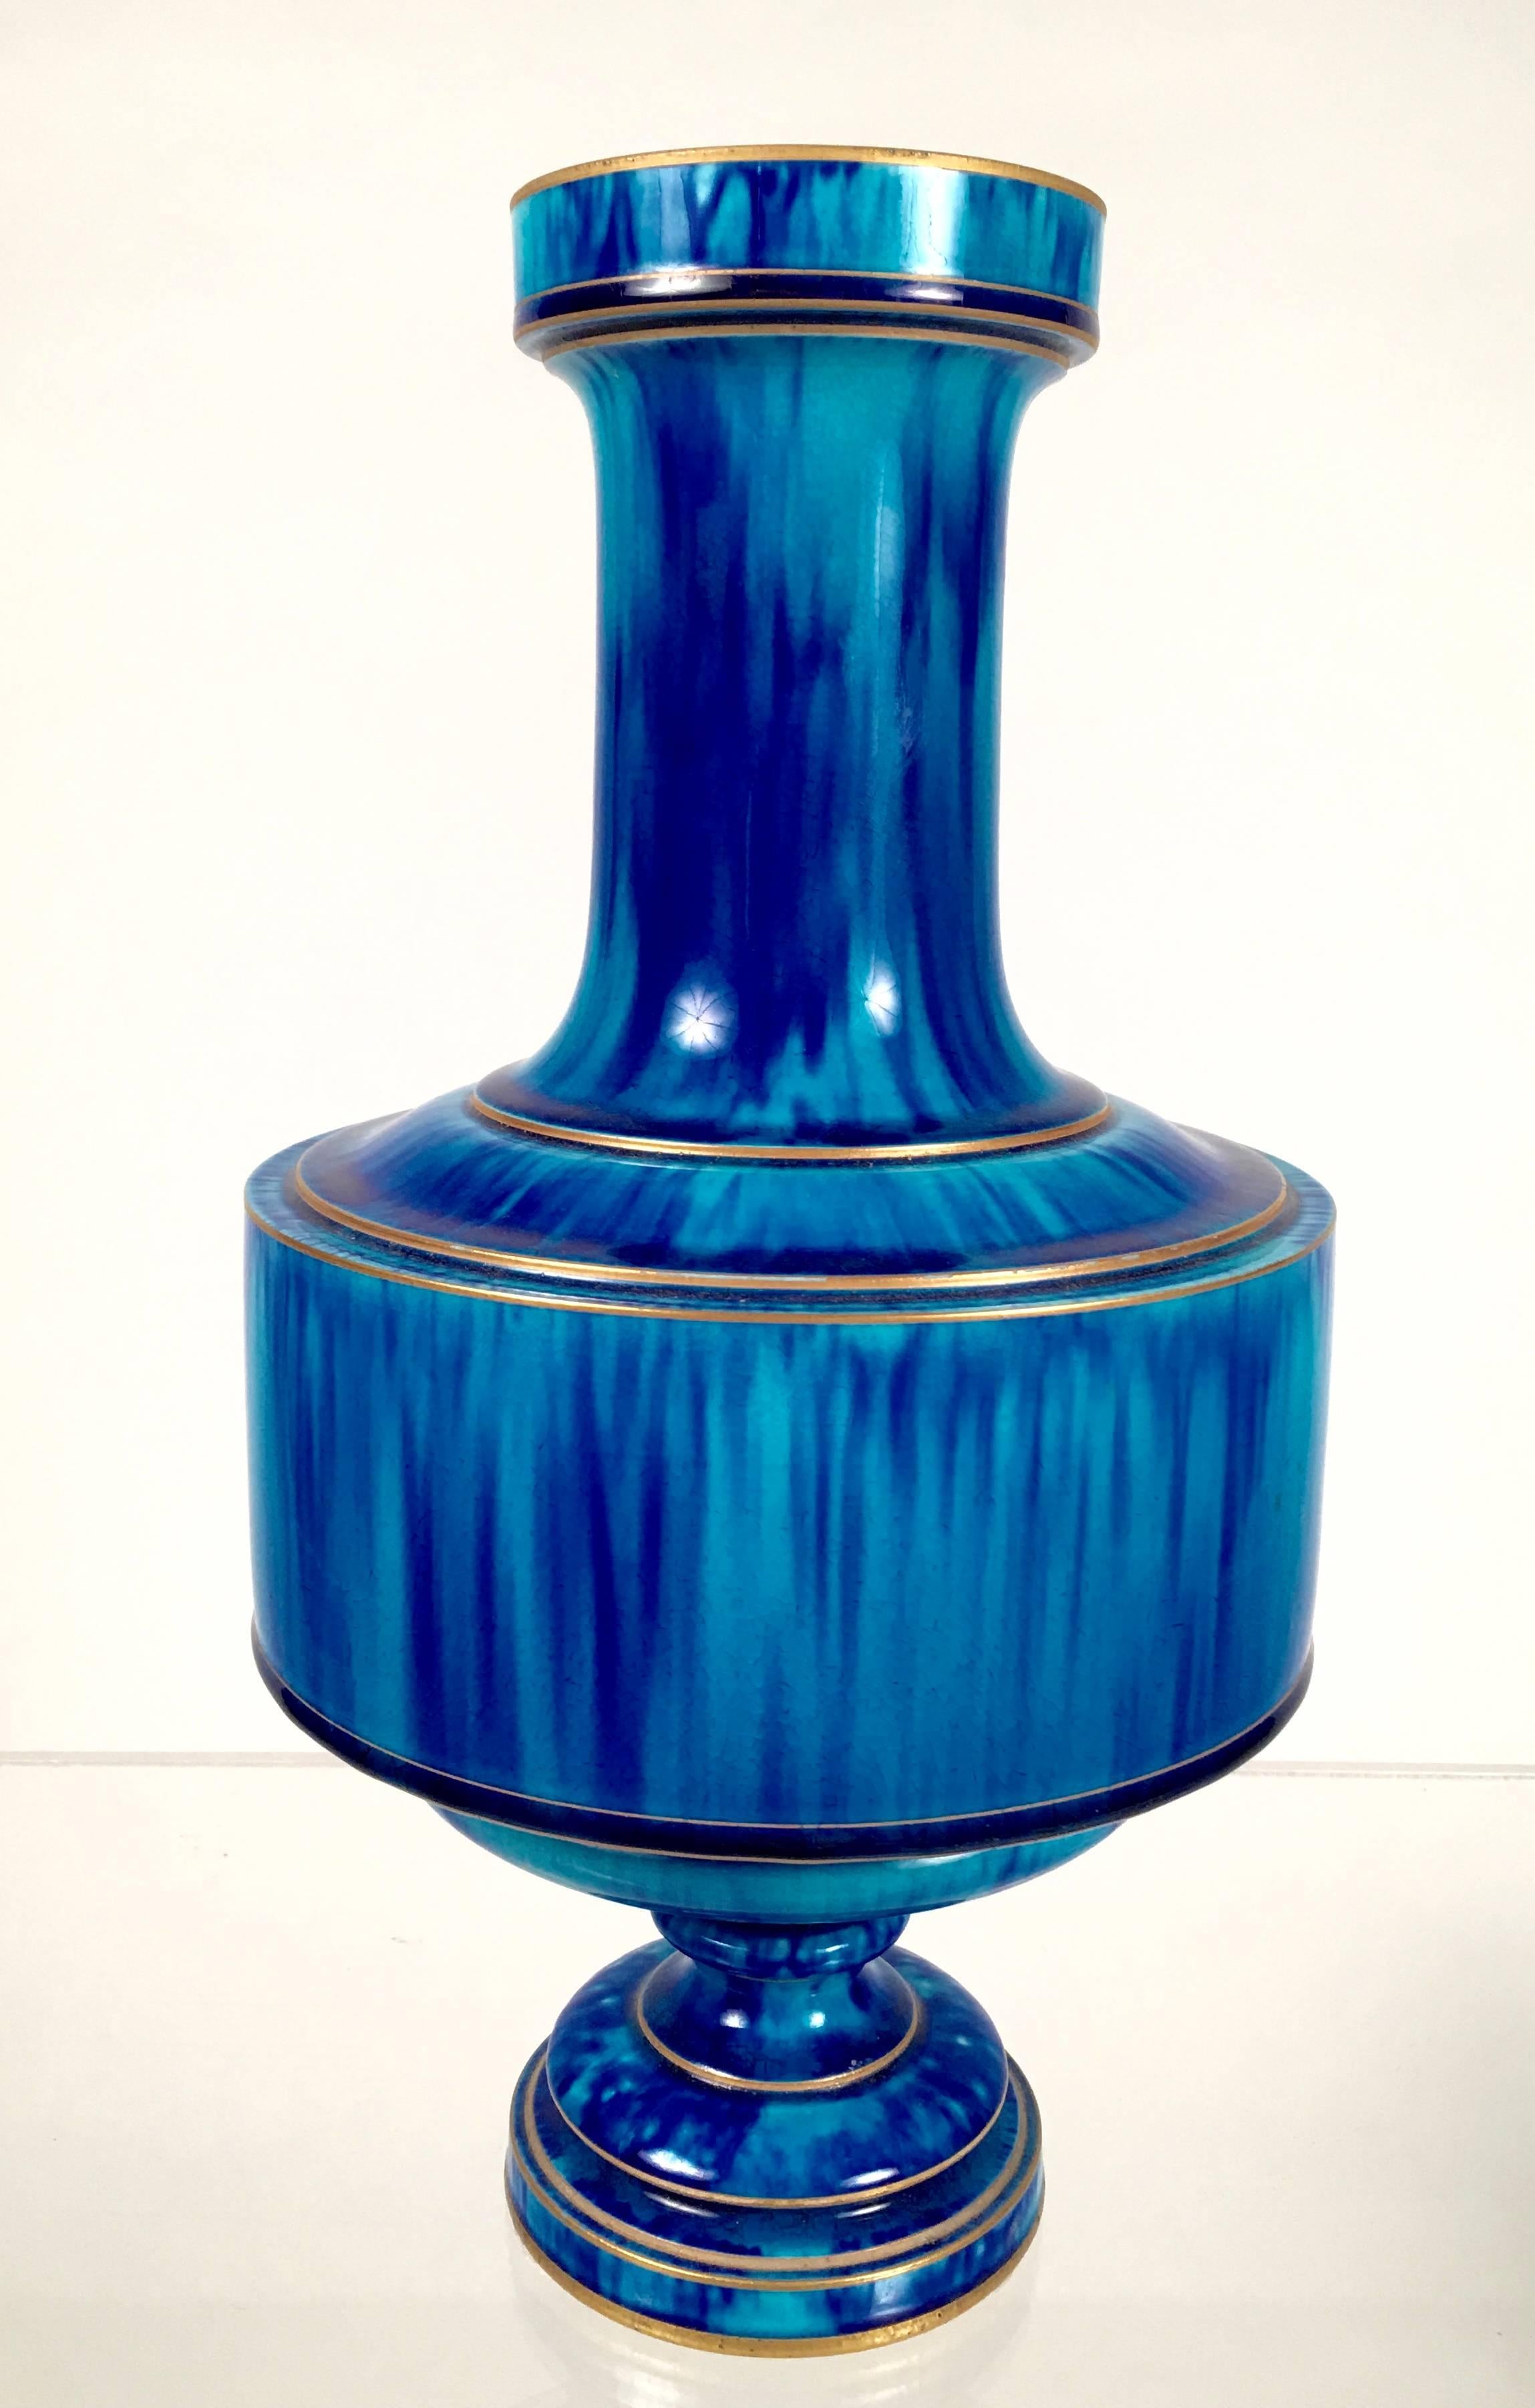 A 19th century French art pottery vase, decorated at Sevres, in mottled blue flambé glaze, the form inspired by ancient Asian bronze vases, with gilded bands. Signed on base. Fabulous color and a form which is evocative of ancient and modern design.